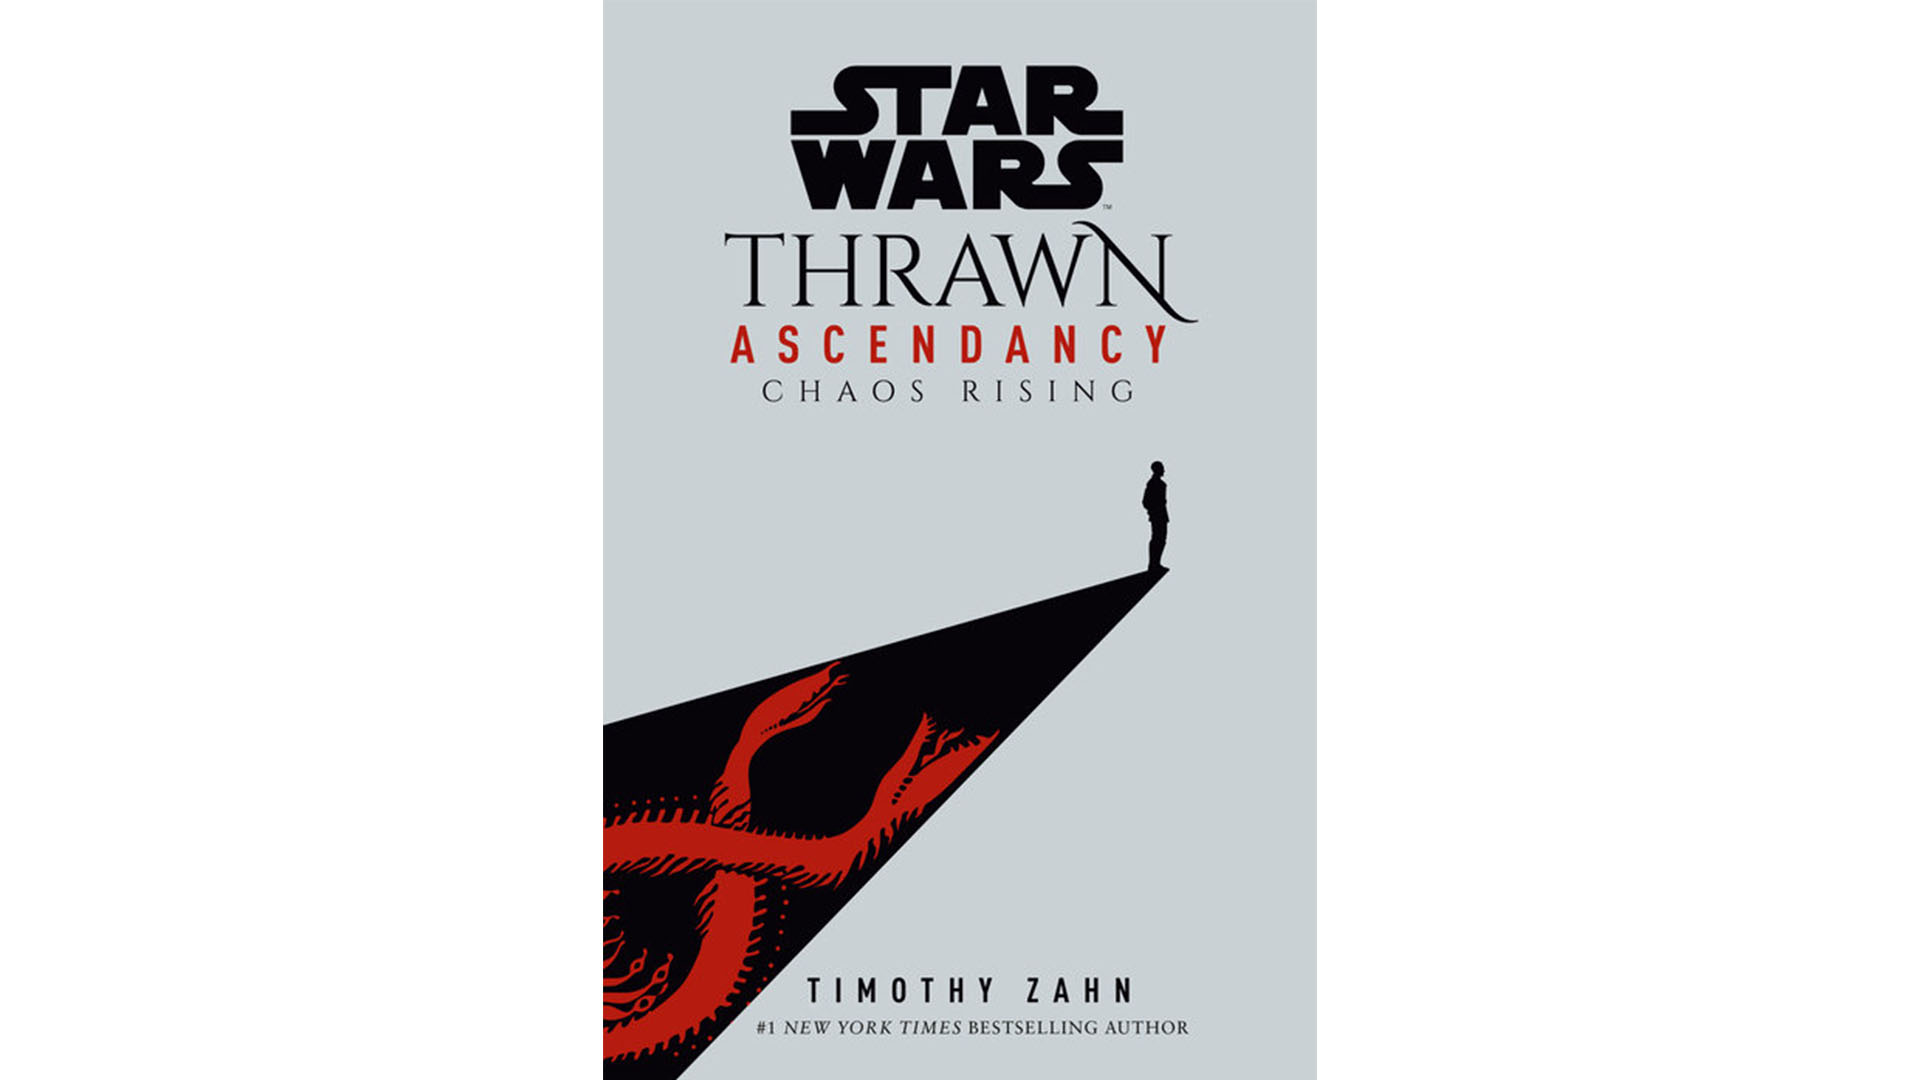 The cover of Star Wars: Thrawn Ascendancy: Chaos Rising (Book I in the Star Wars: The Ascendancy Trilogy)